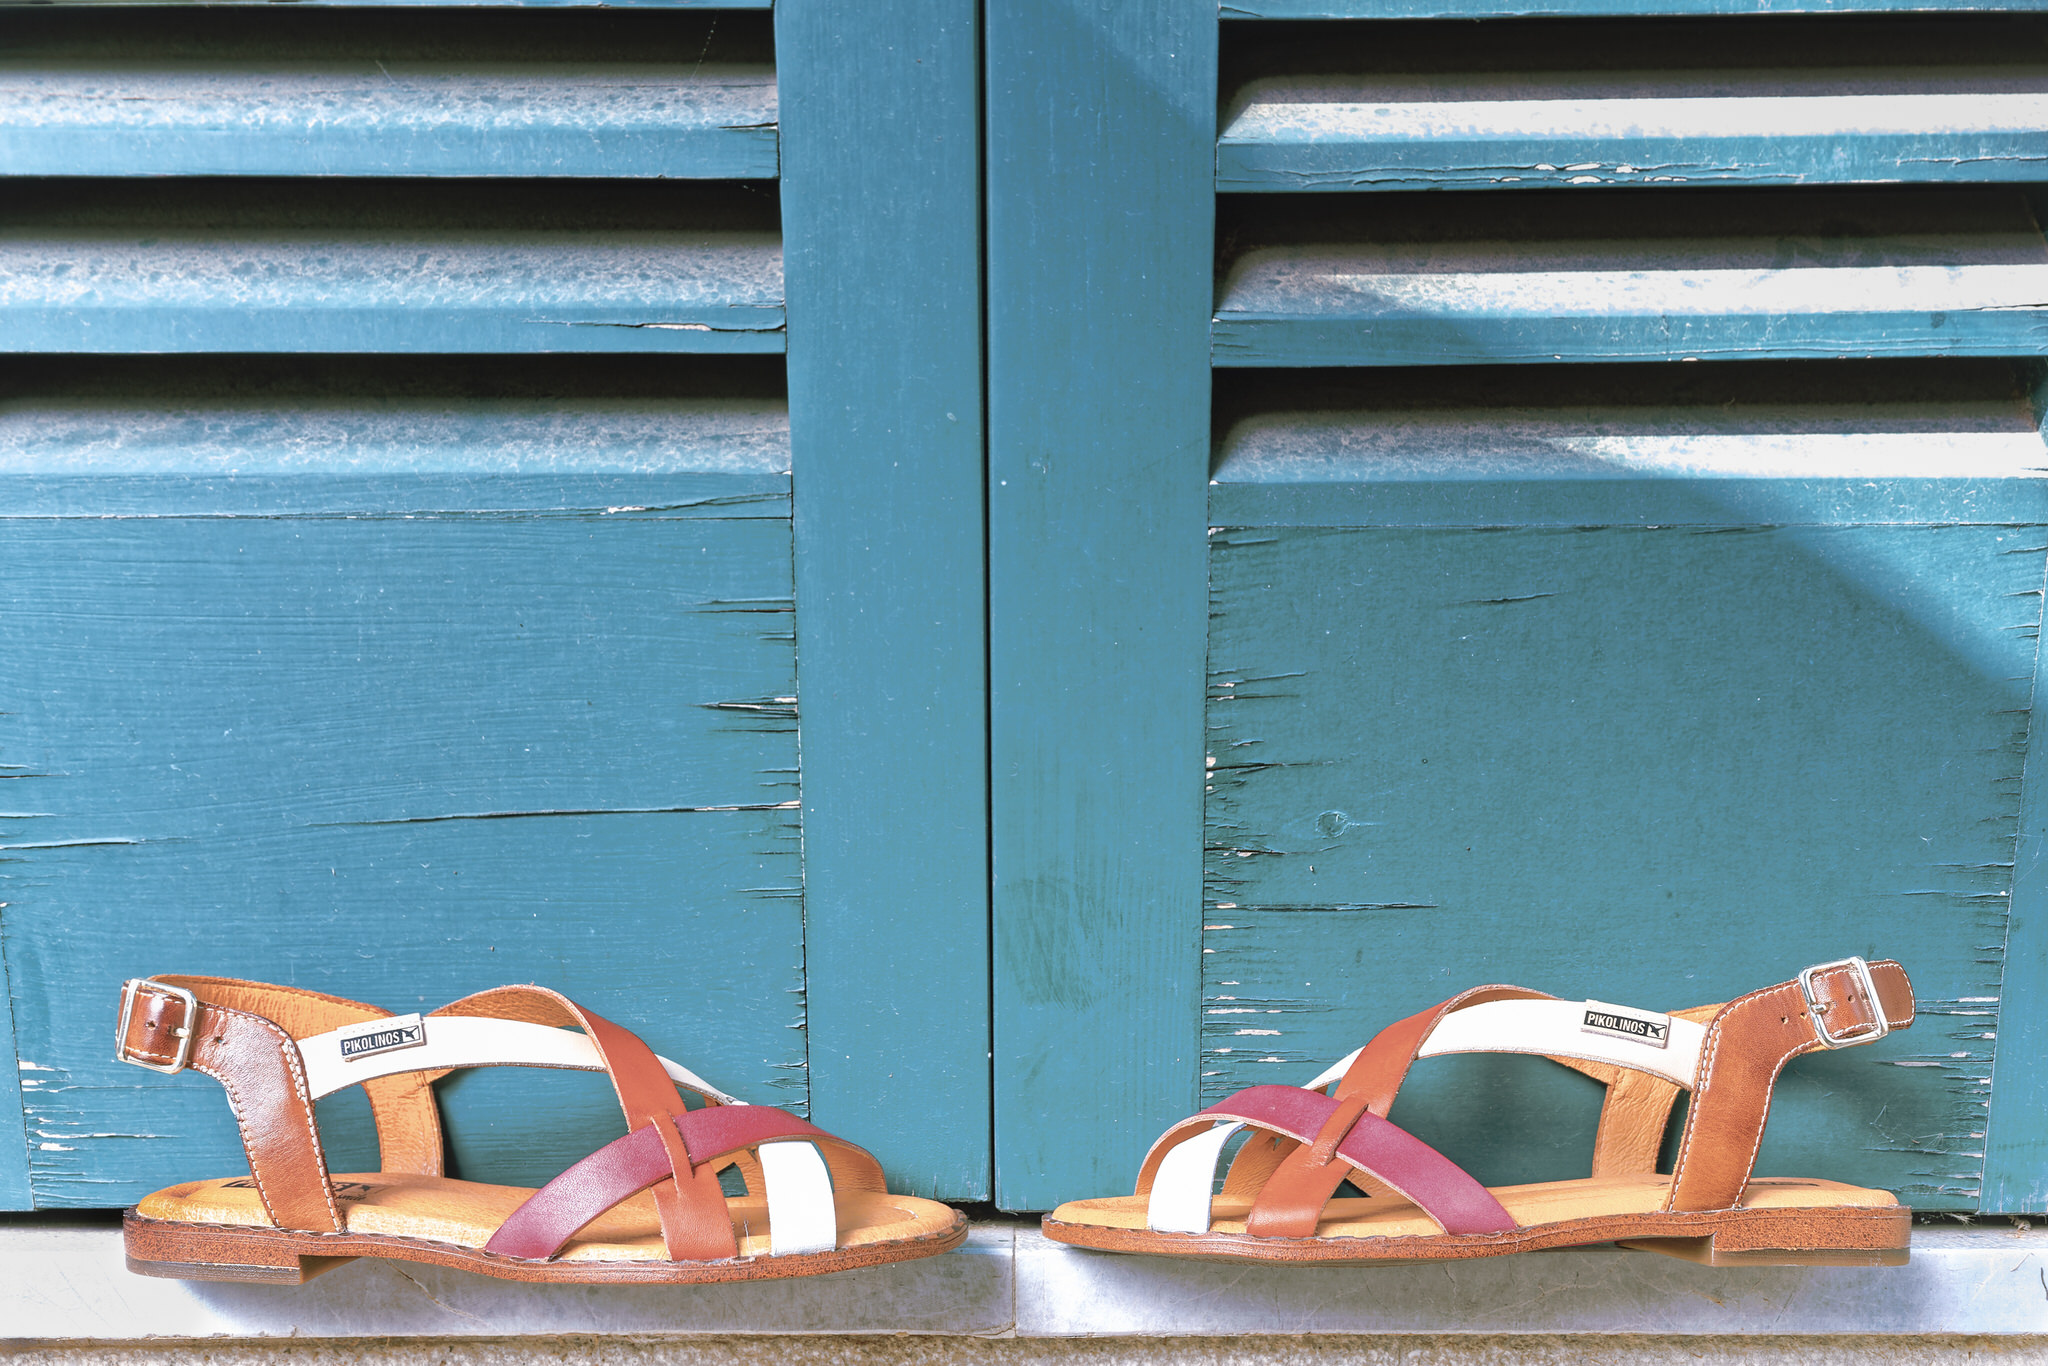 Photograph of Pikolinos women's sandals in a window of the Ca'n Boqueta restaurant